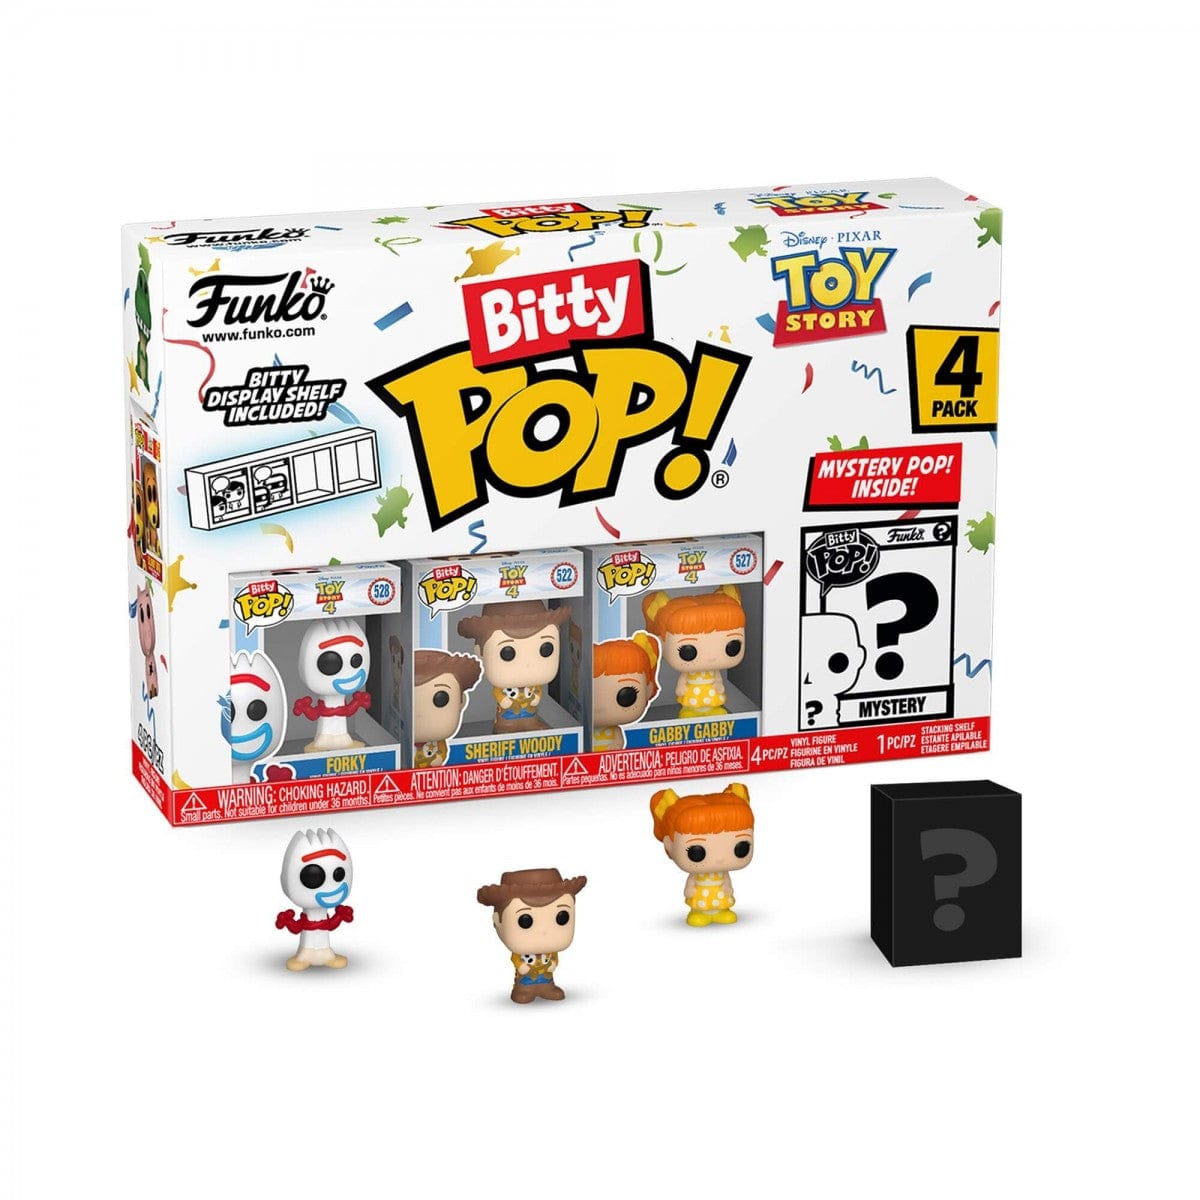 Funko Bitty POP 4 Pack: Toy Story 4 889698730402